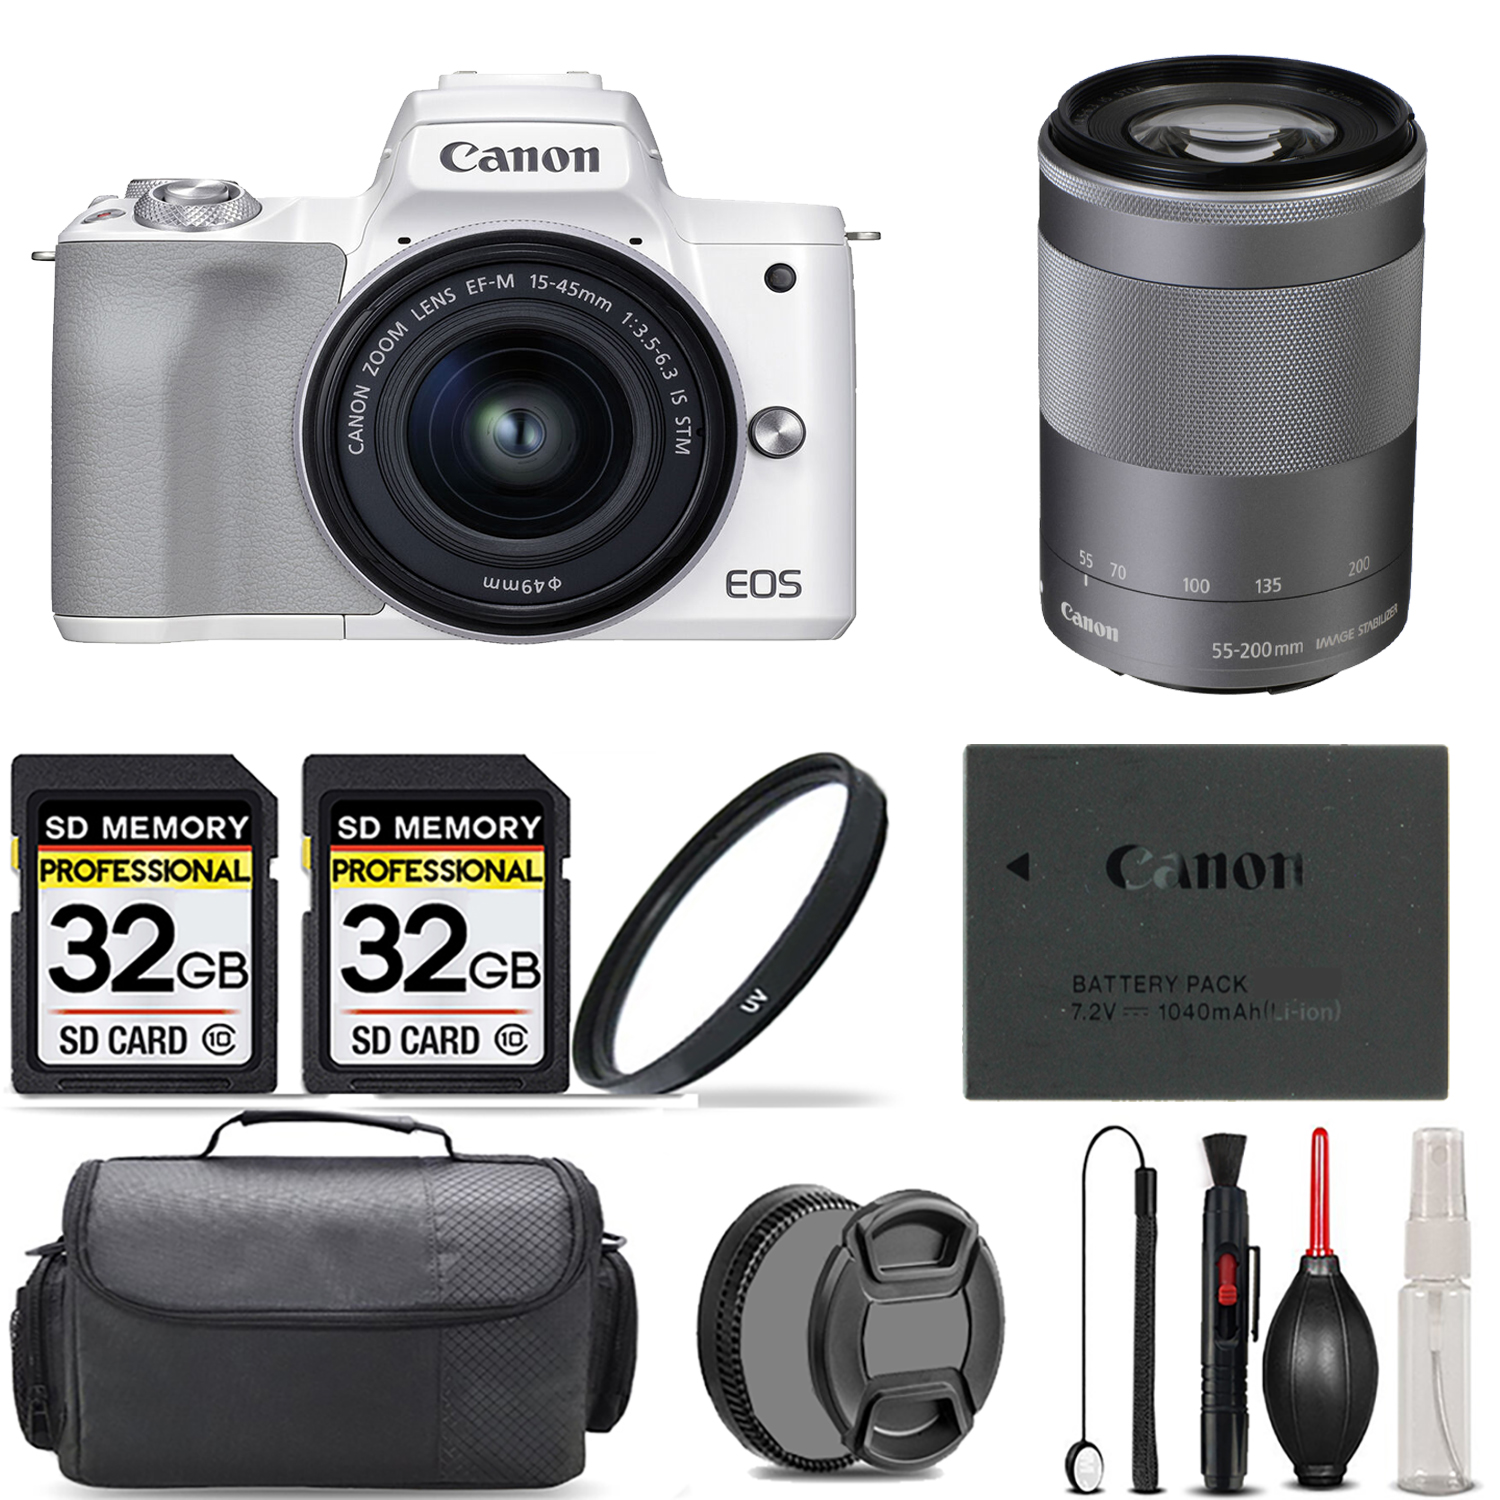 M50 II + 15-45mm Lens (White) + 55-200mm IS Lens (Silver) + UV Filter + 64GB *FREE SHIPPING*